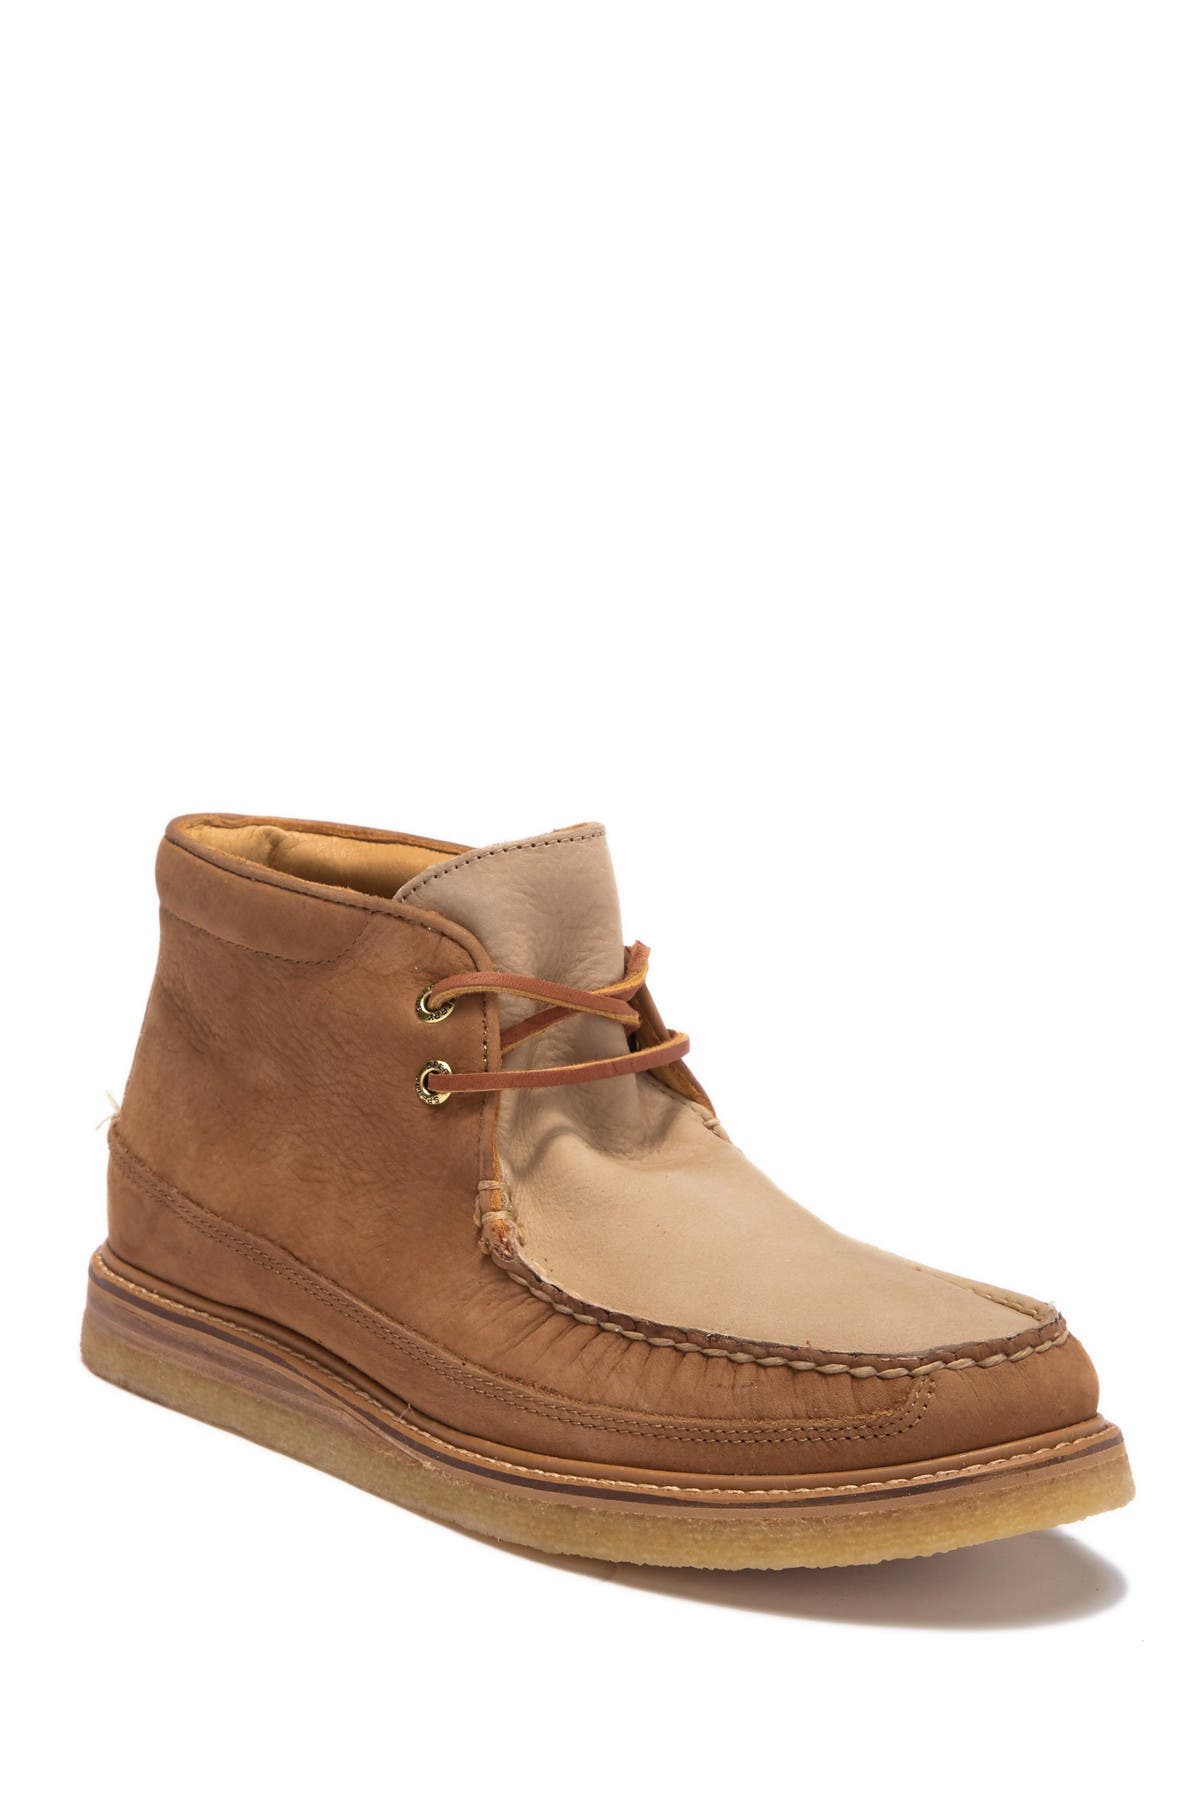 sperry lace up chukka